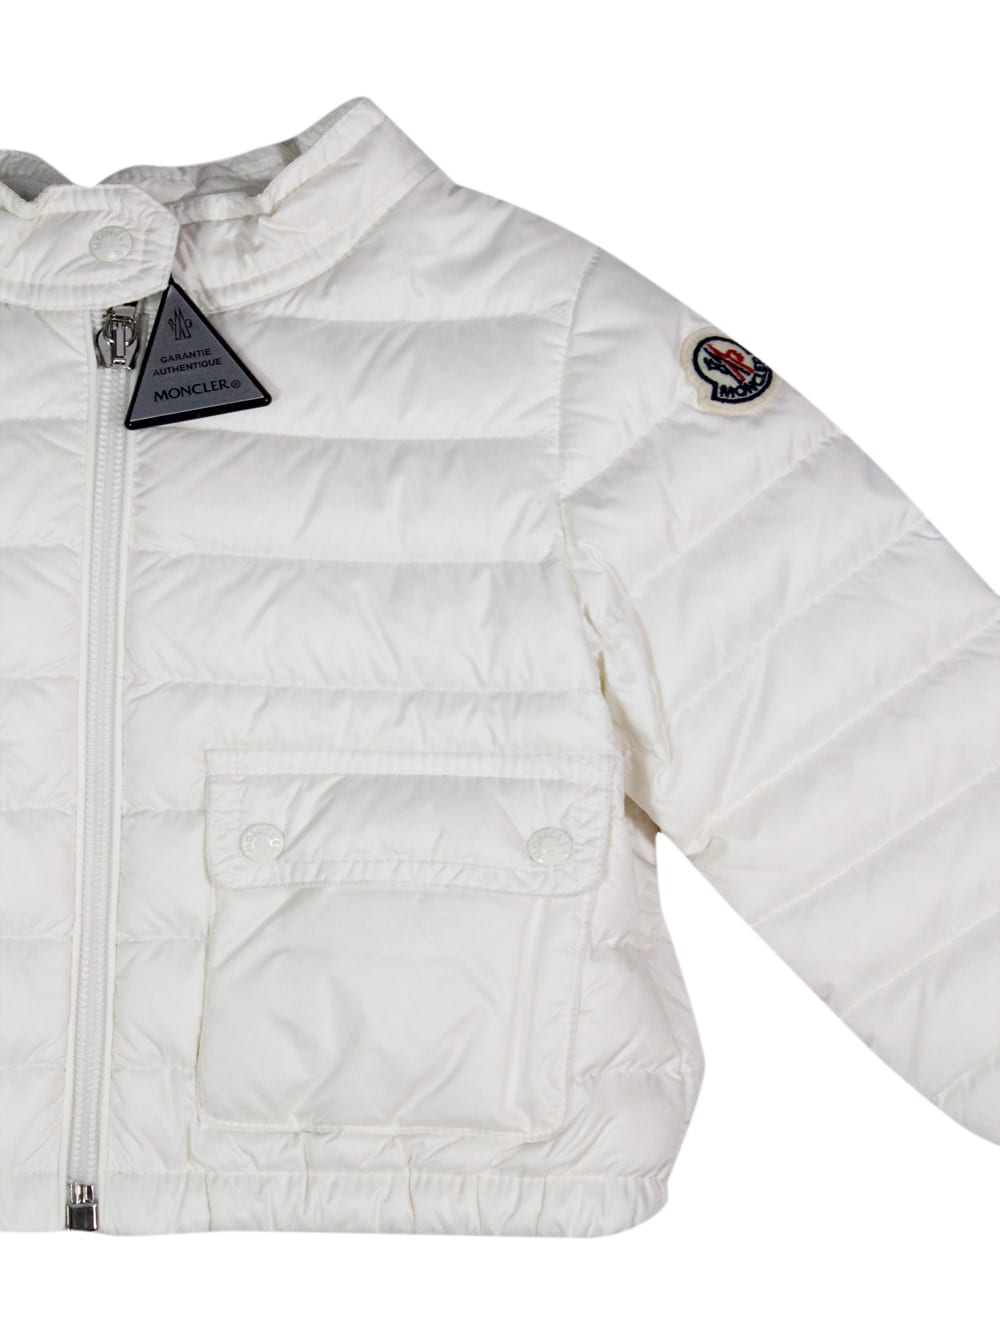 Shop Moncler Lightweight 100 Gram Lans Long-sleeved Down Jacket With Front Zip Closure And Front Pockets. Logo On In White